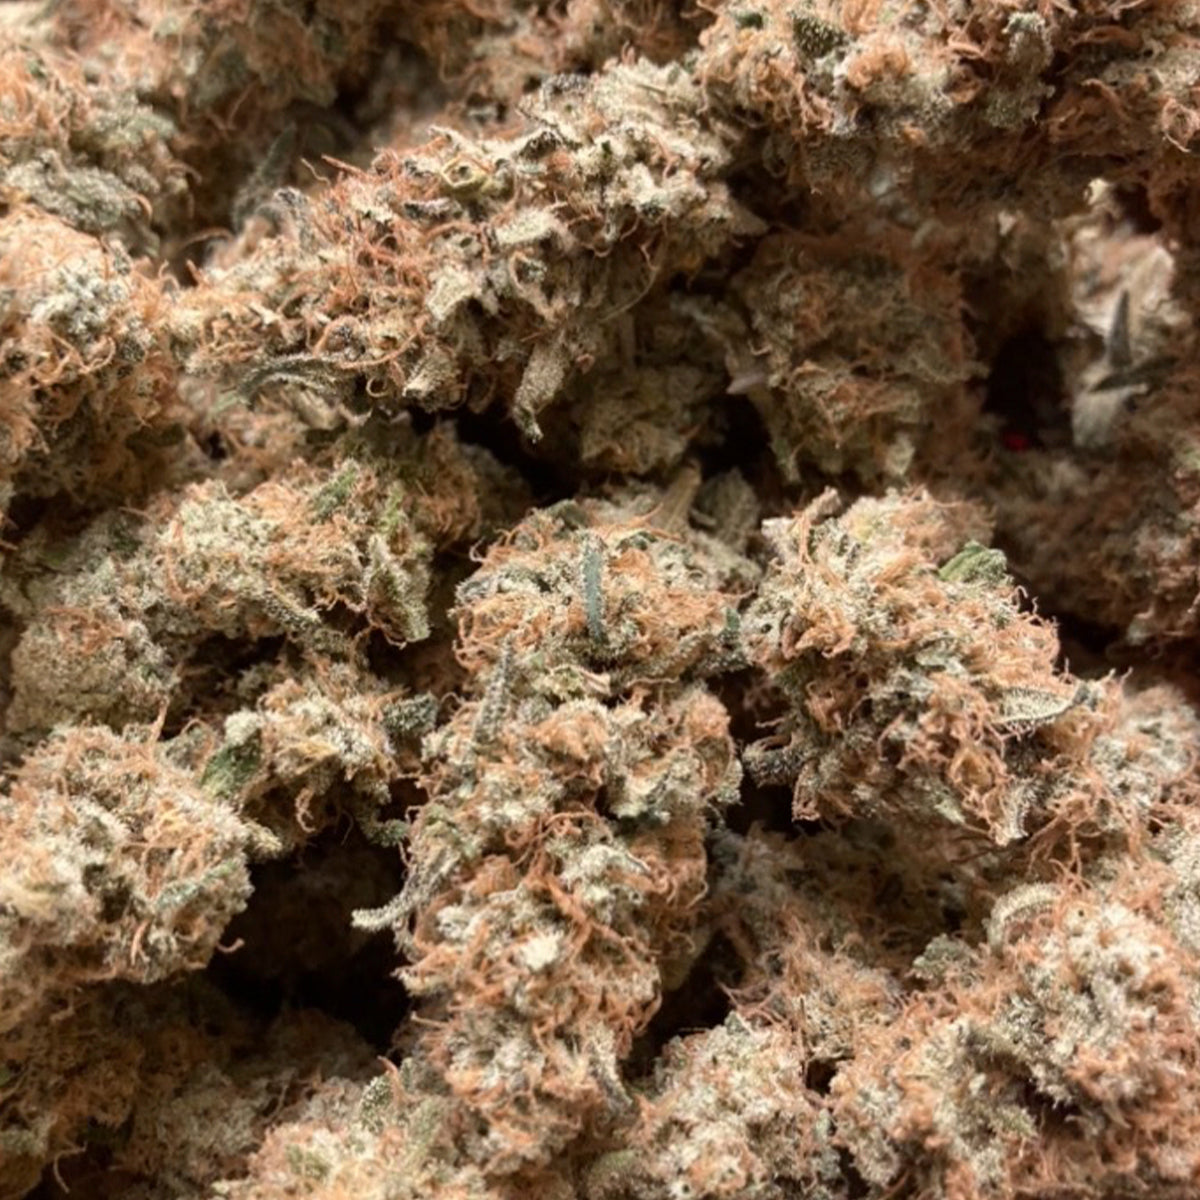 Mango Post CBD Sativa Premium Hemp Flower - This high CBD sativa variety is a special pheno from a local Tennessee farmer. With beautiful long orange pistils and an unforgettable mango, citrus nose. A true sativa you will want to try! Available in 3.5g and 14g size jars.